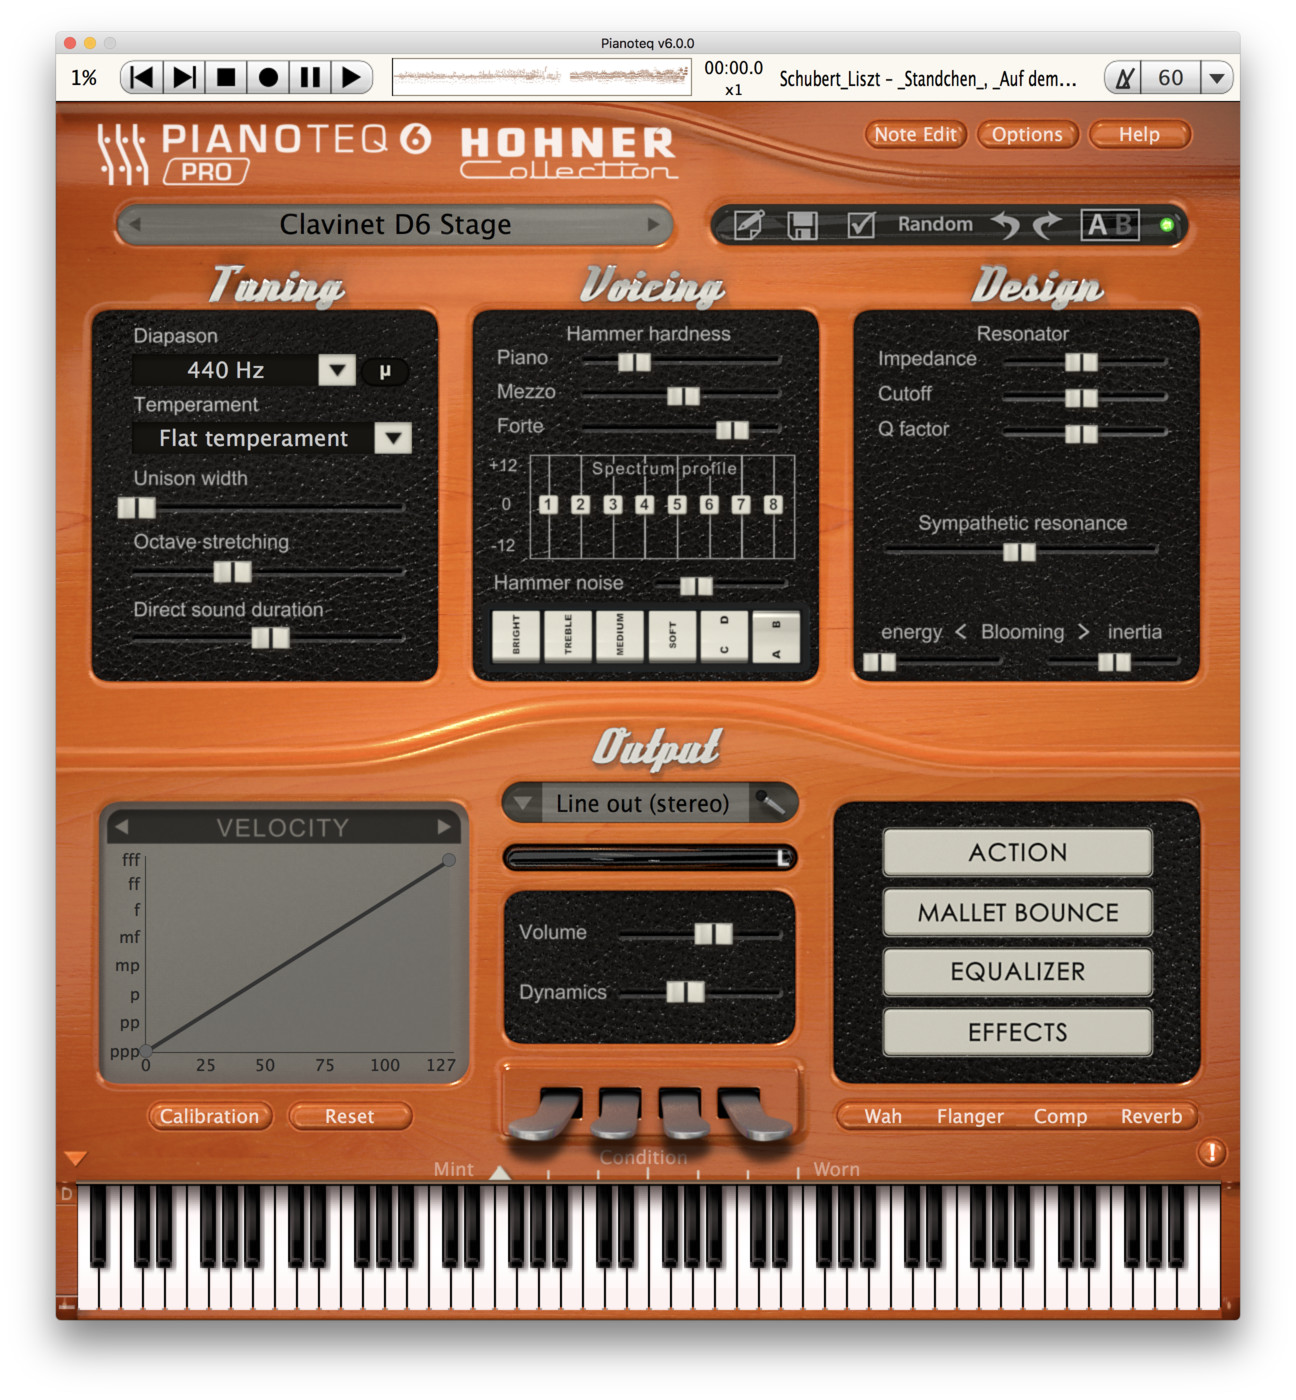 Hohner Collection add-on for Pianoteq